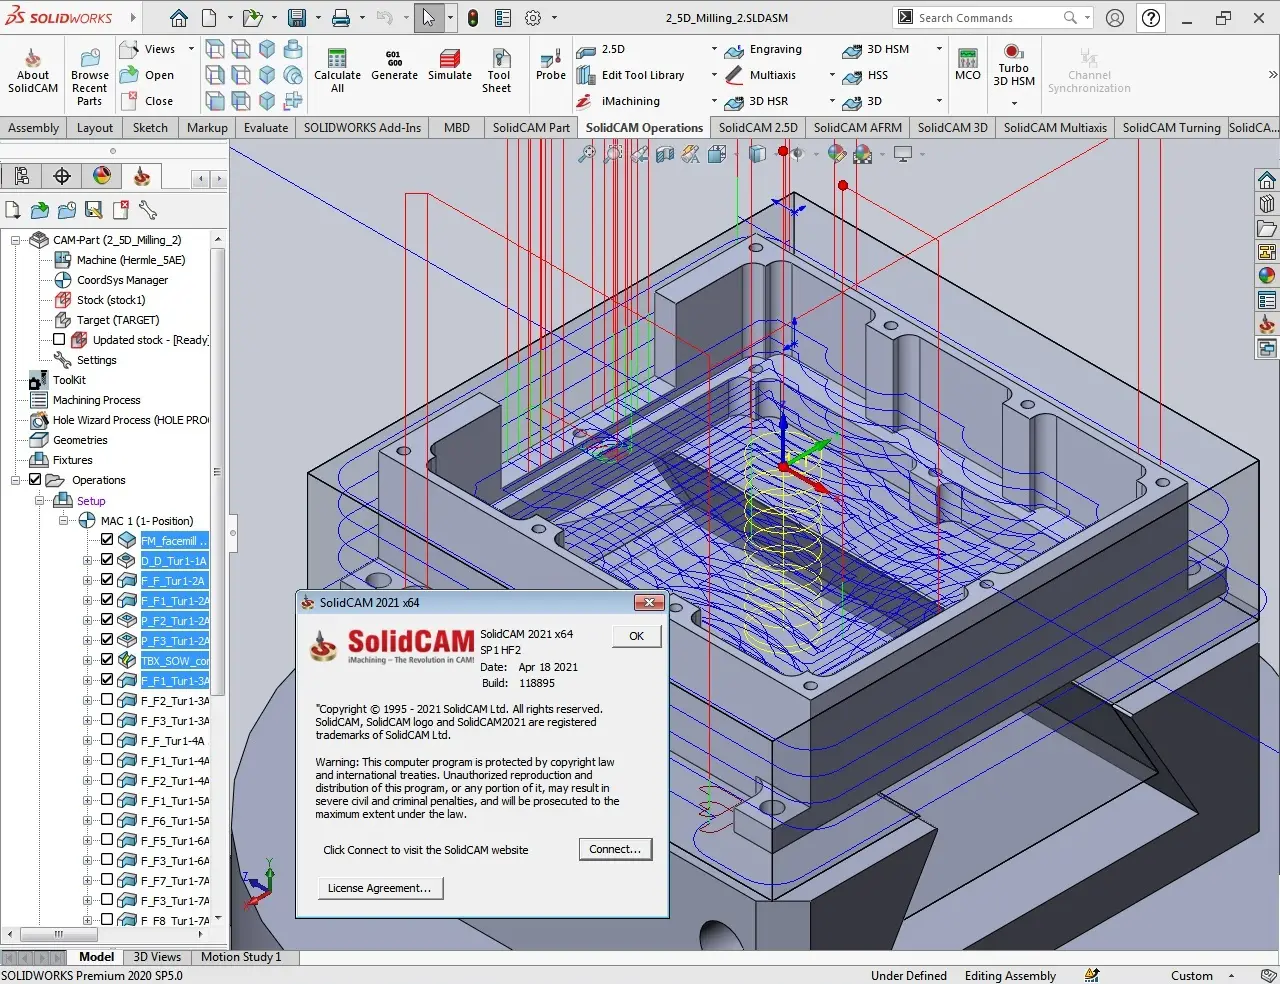 for ipod download SolidCAM for SolidWorks 2023 SP1 HF1